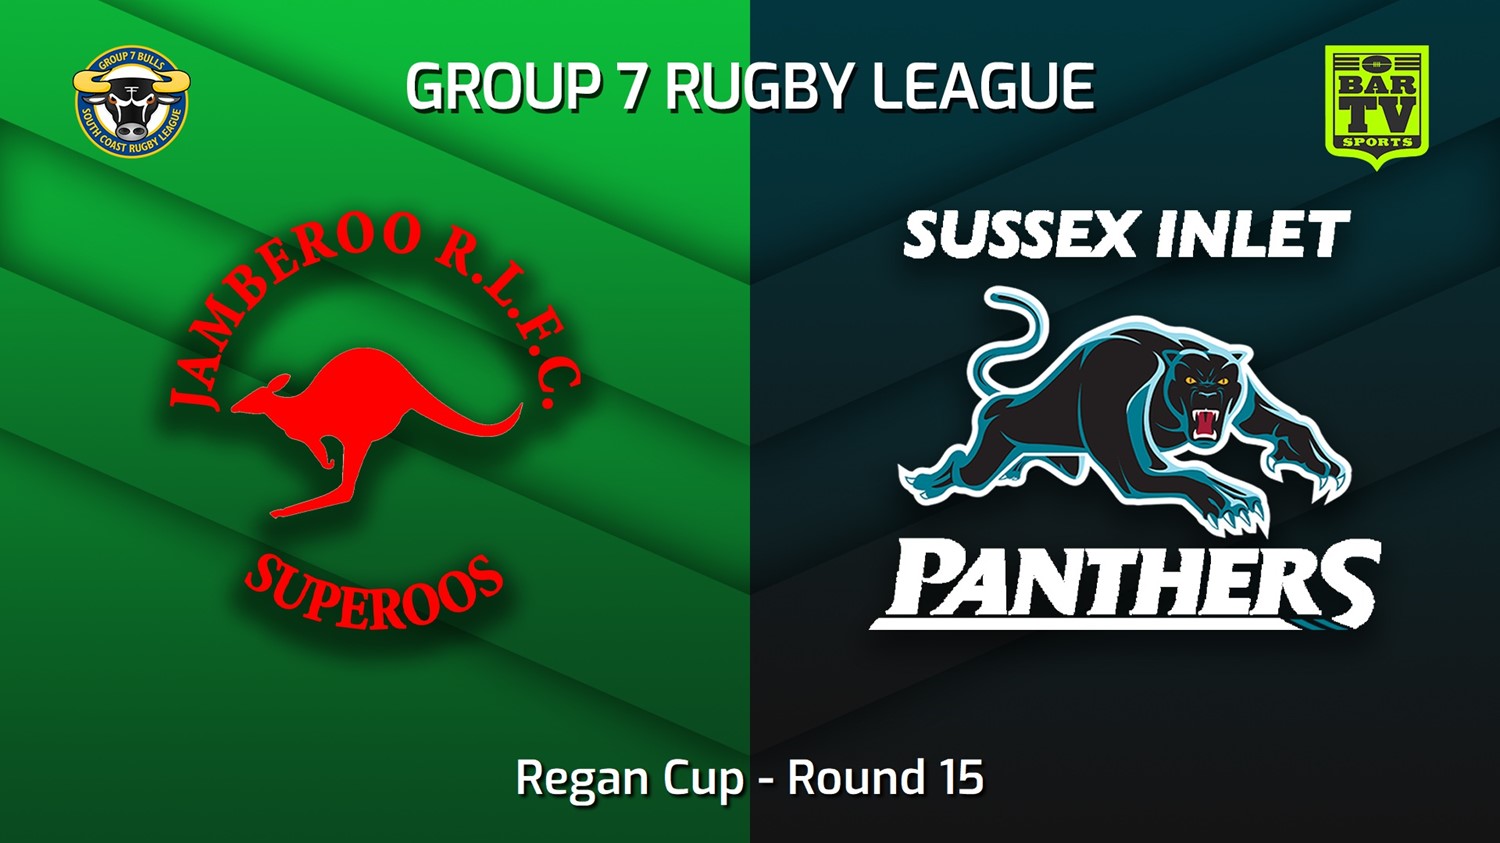 220806-South Coast Round 15 - Regan Cup - Jamberoo v Sussex Inlet Panthers Slate Image